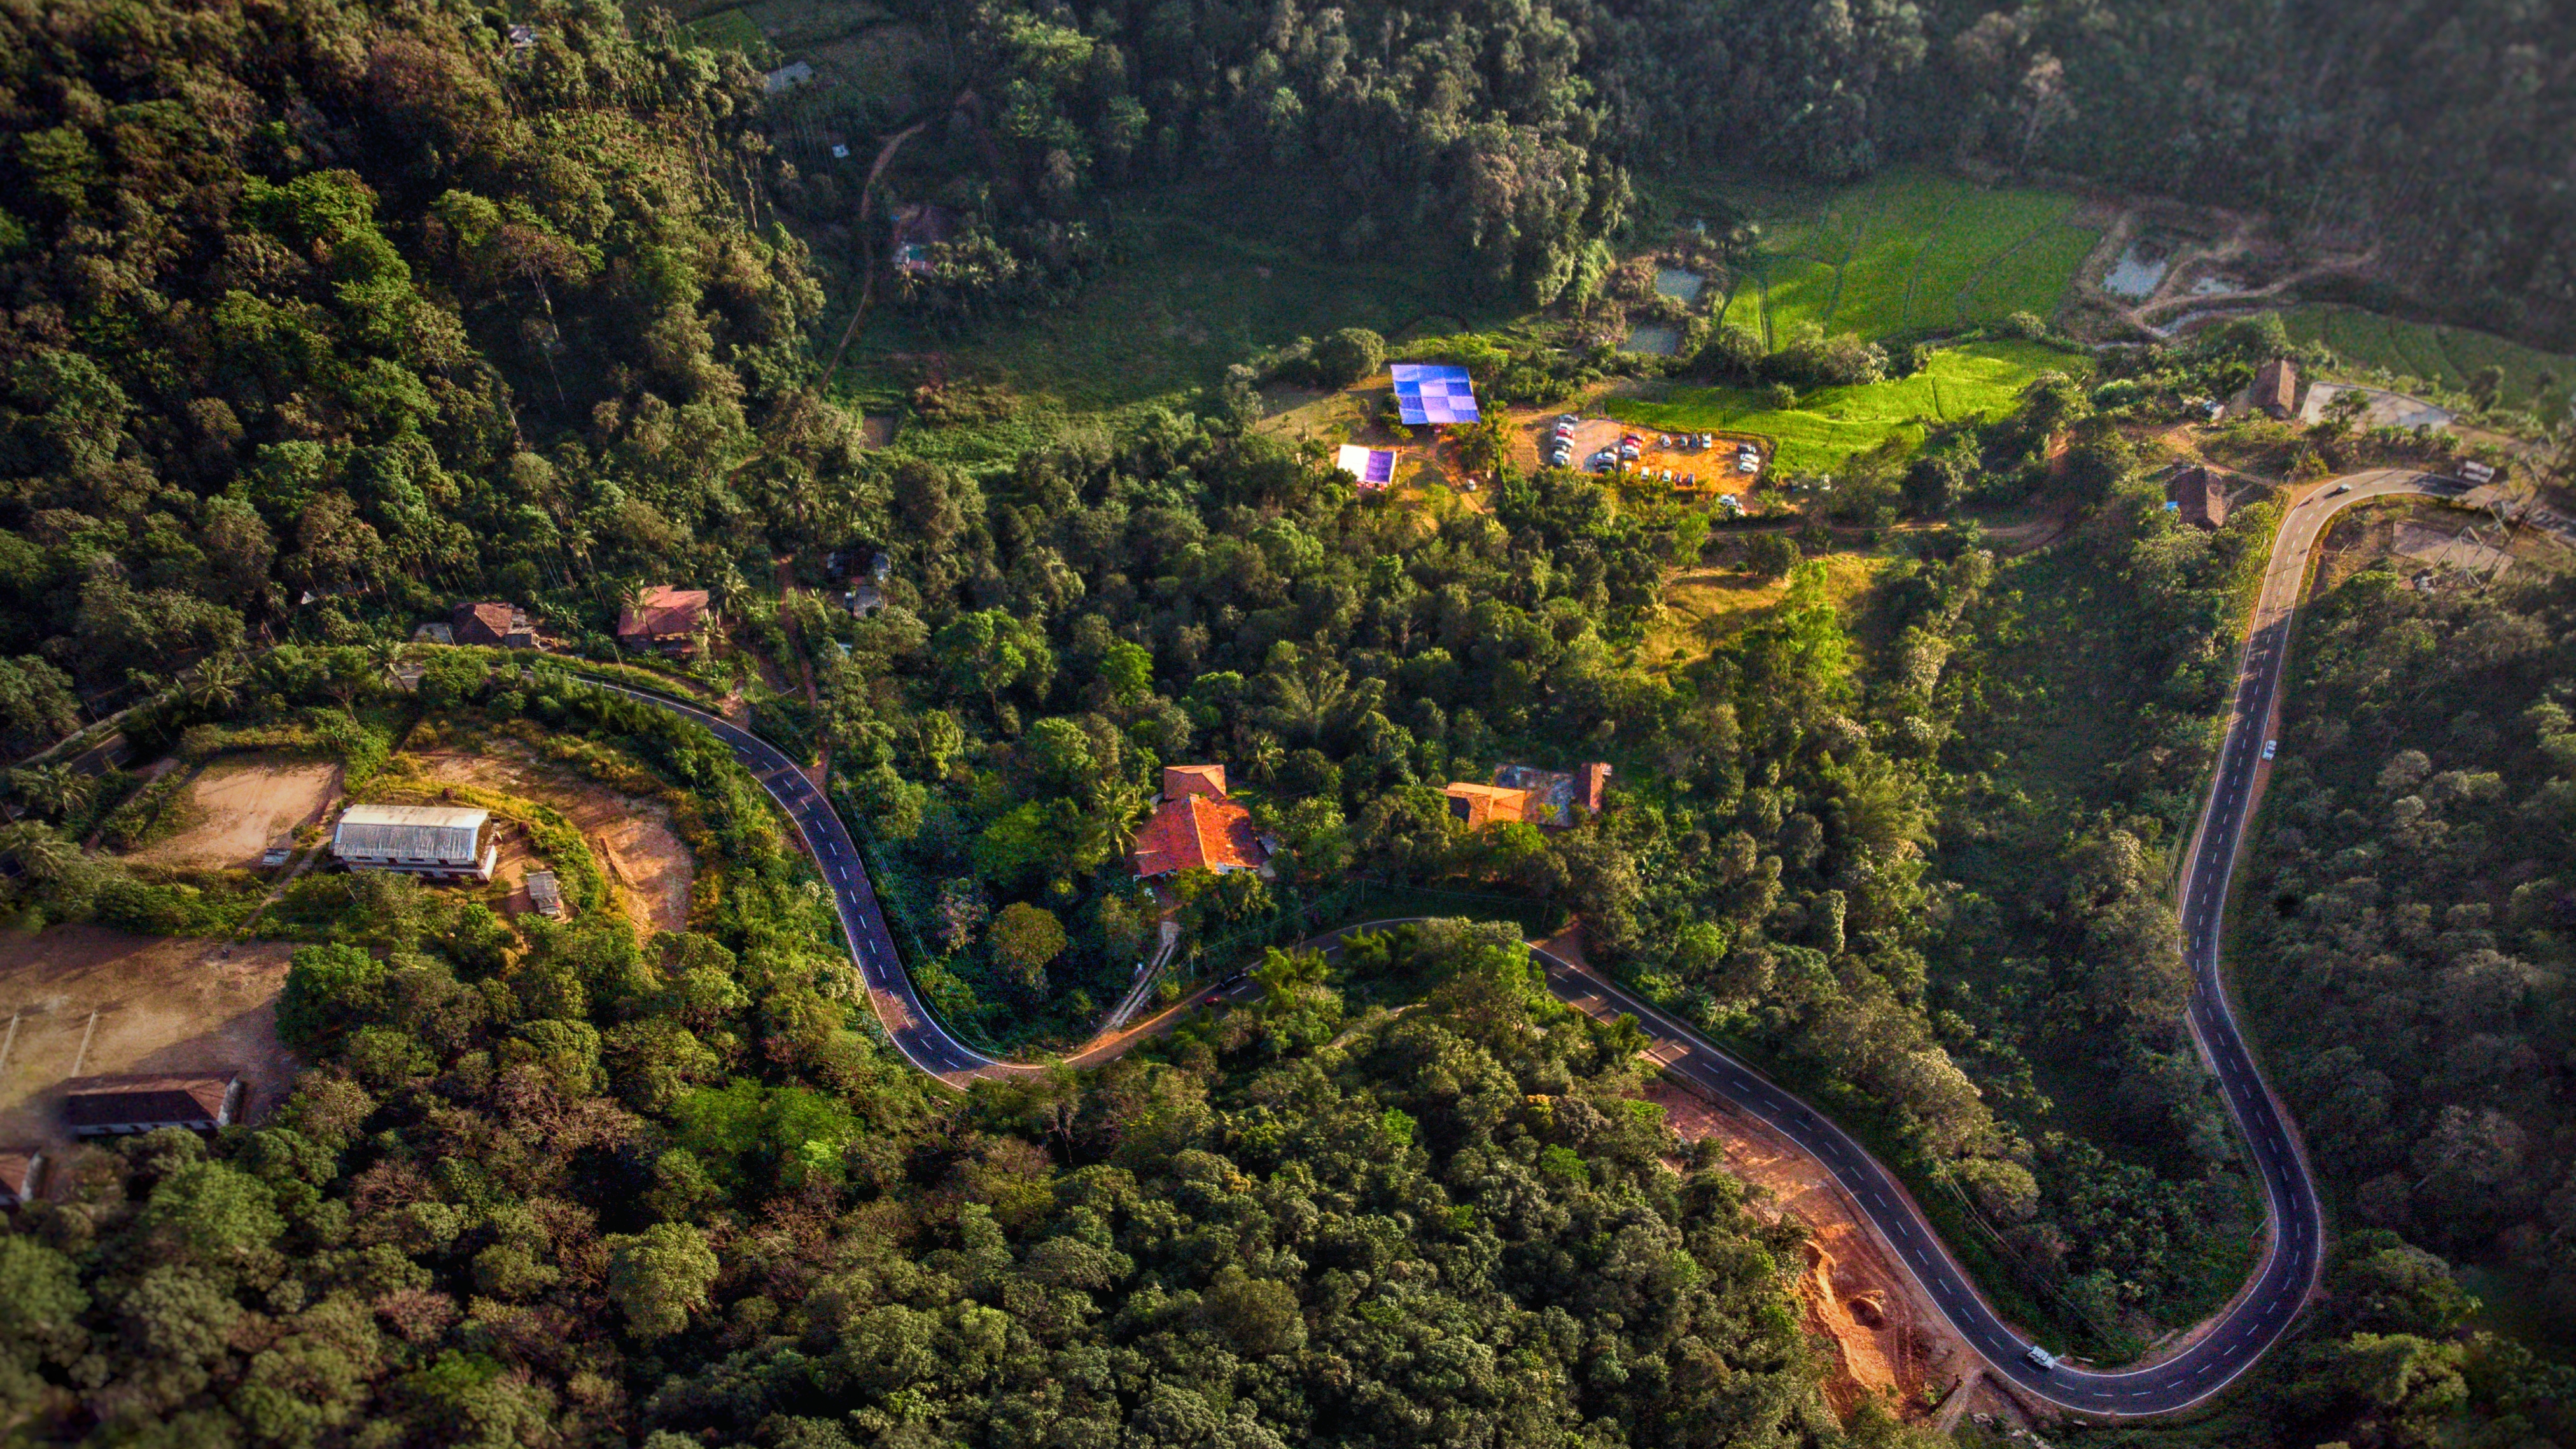 Coorg is a perfect weekend getaway when visiting hill stations in India